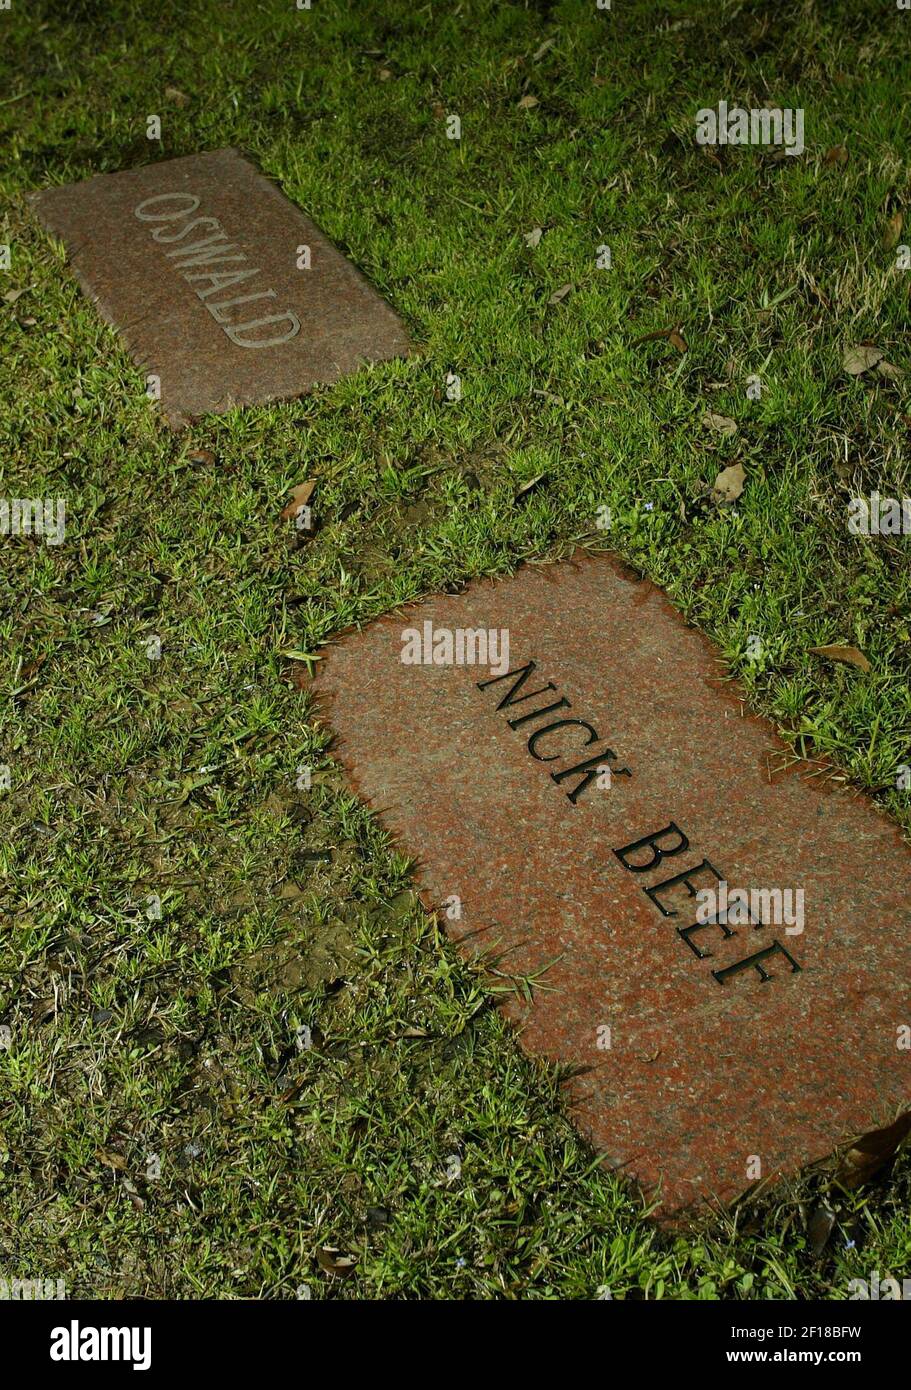 KRT US NEWS STORY SLUGGED: OSWALD-GRAVE KRT PHOTOGRAPH BY ALISON  WOODWORTH/FORT WORTH STAR-TELEGRAM (DALLAS-OUT) (March 13) A gravestone  with the name Nick Beef neighbors Lee Harvey Oswald's grave at Shannon Rose  Hill